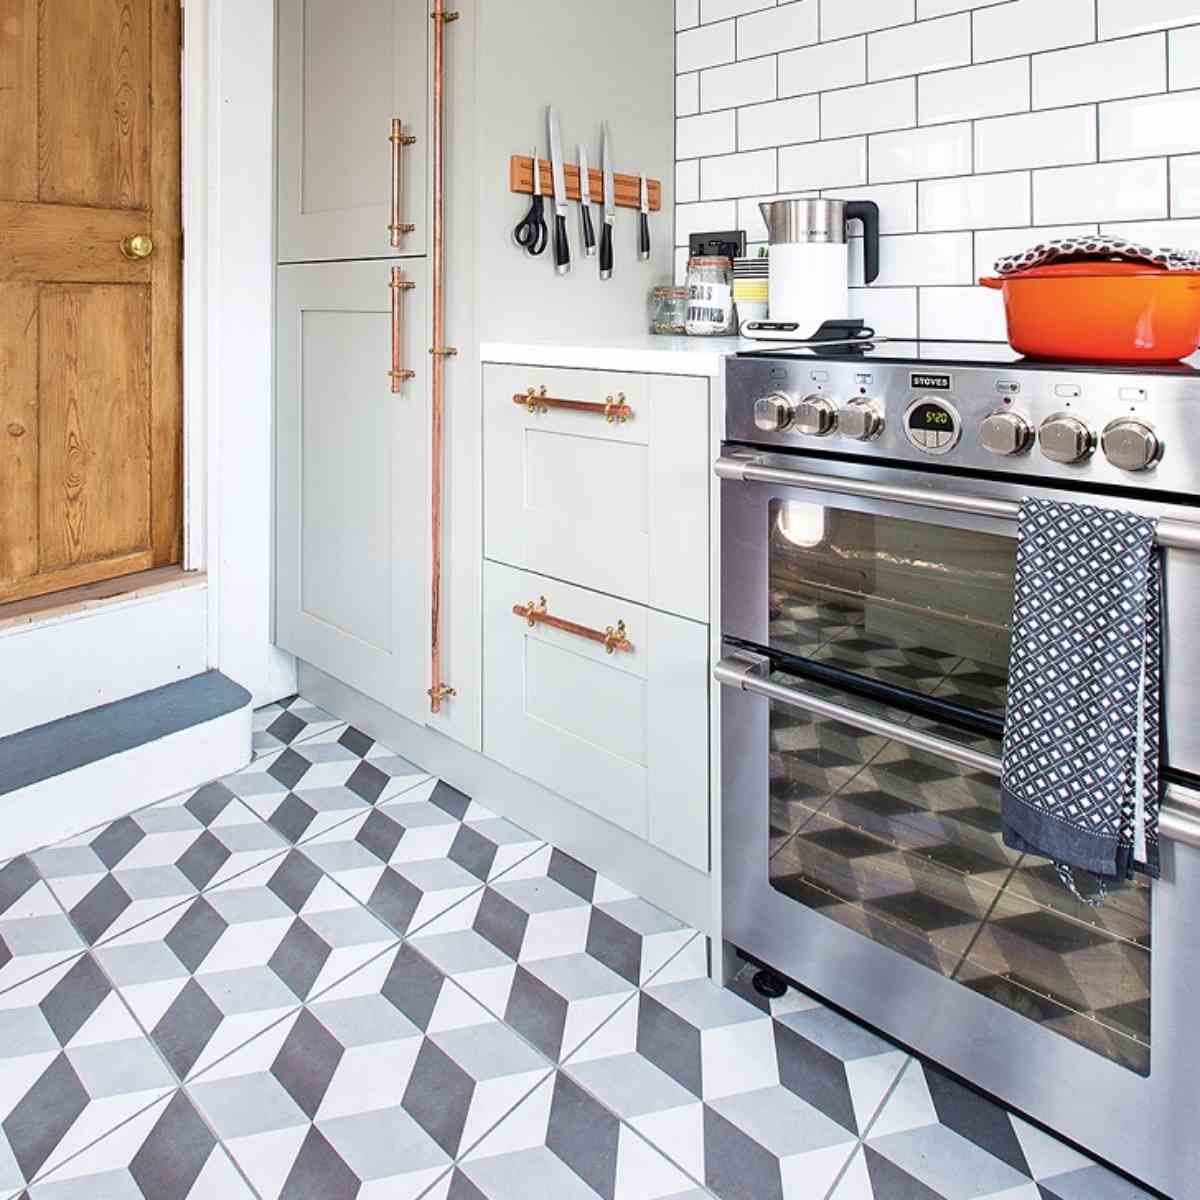 Top 18 kitchen flooring ideas – pros and cons of the most popular ...